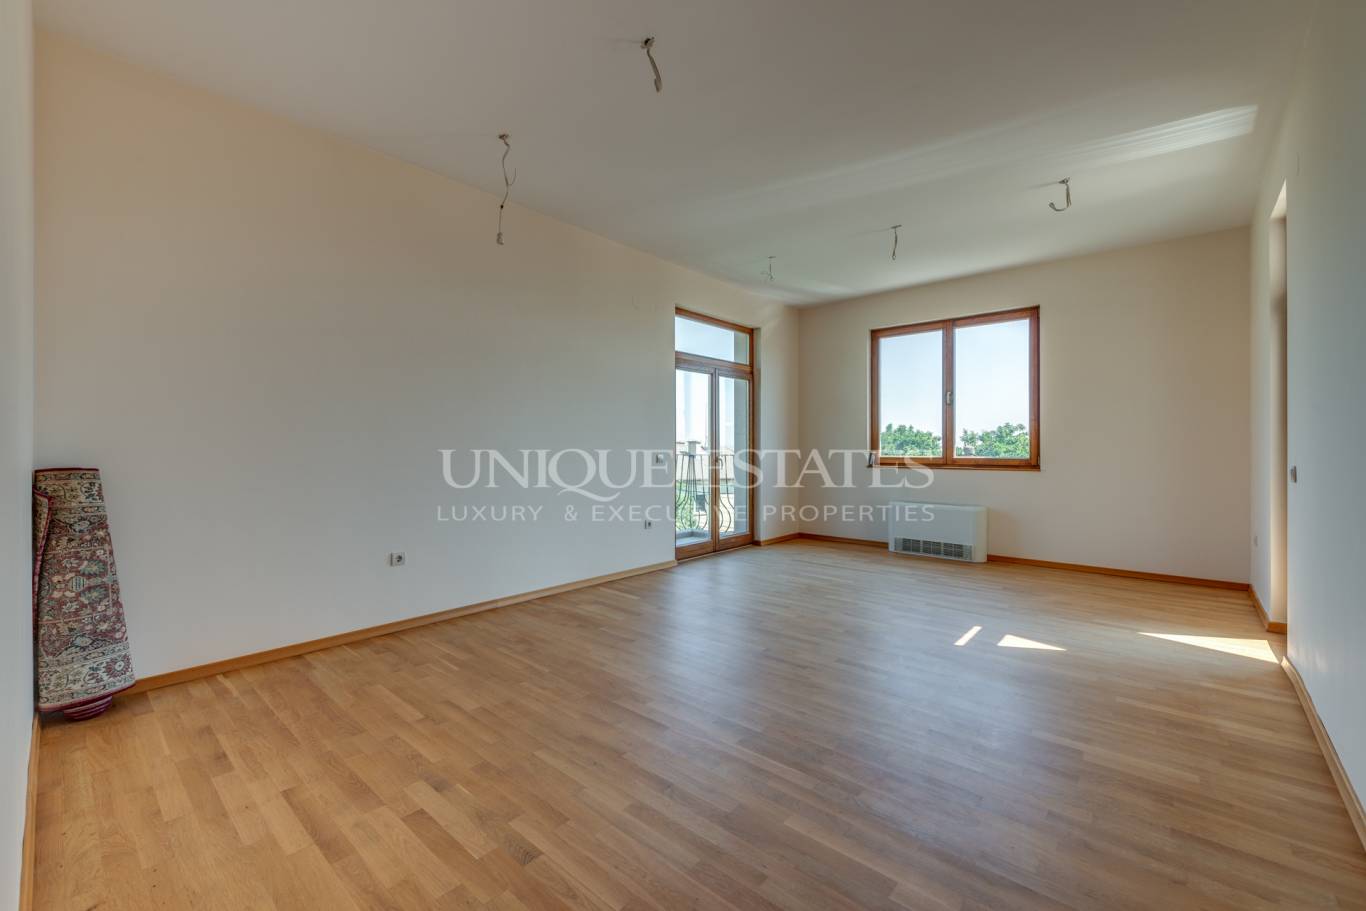 Office for sale in Sofia, Simeonovo with listing ID: K11469 - image 6